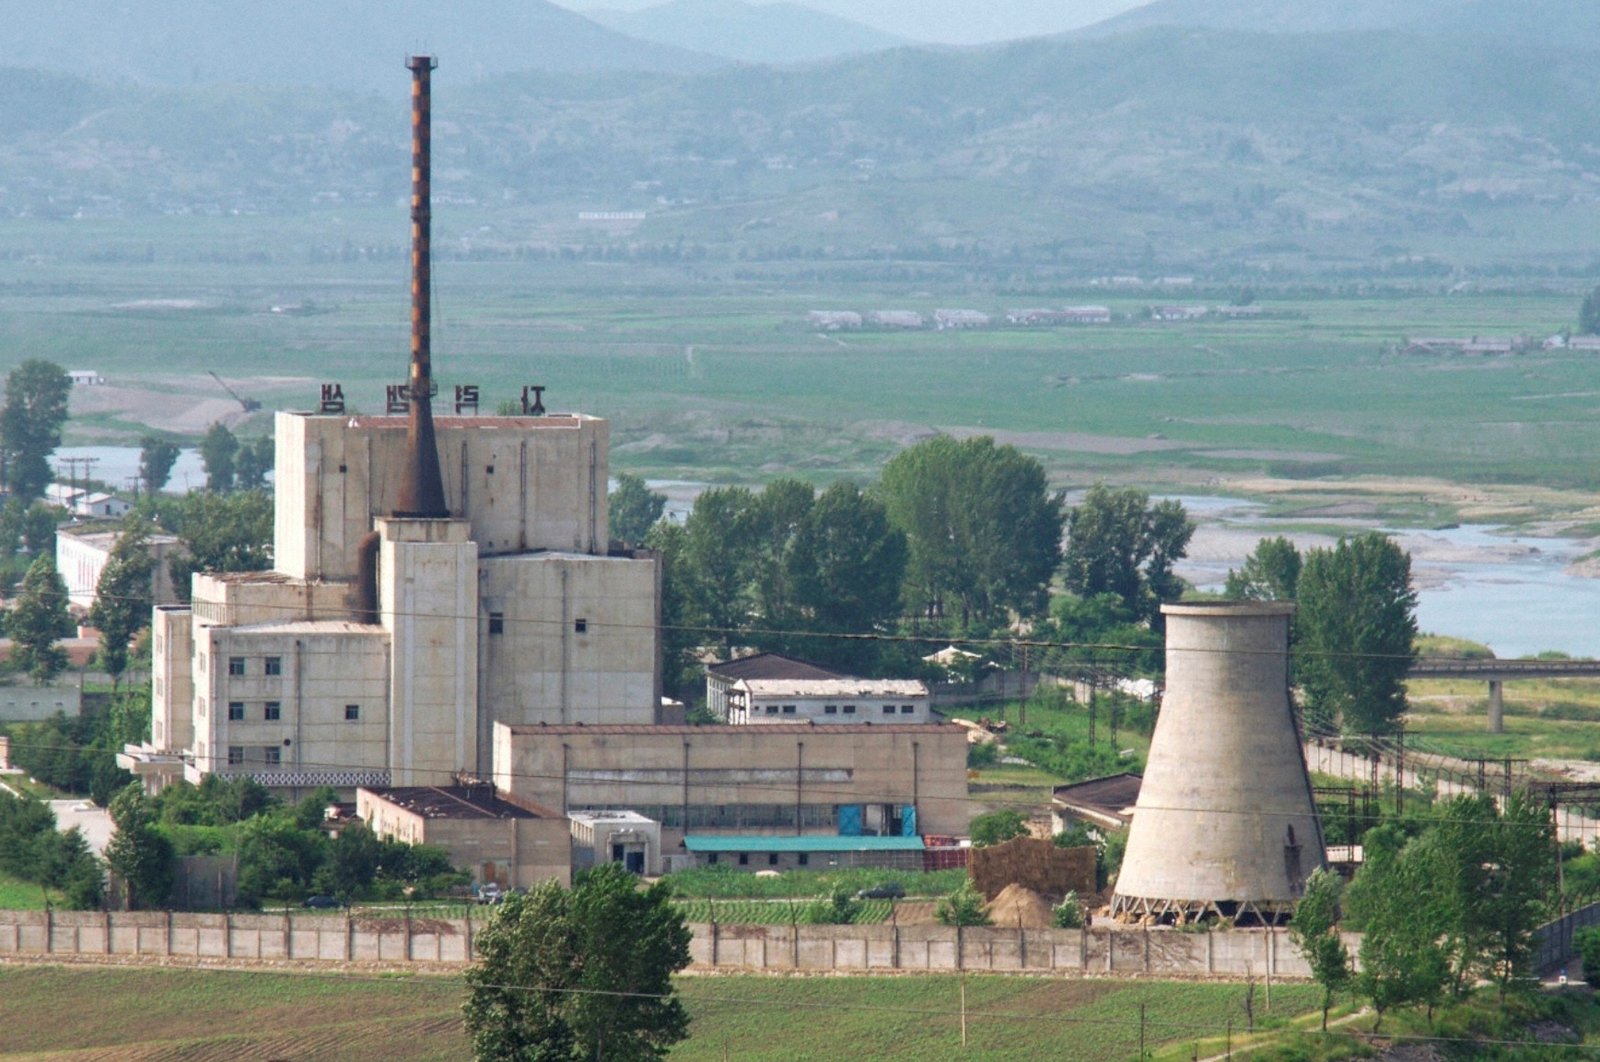 A North Korean nuclear plant is seen before demolishing a cooling tower (R) in Yongbyon, North Korea, June 27, 2008. (Reuters Photo)